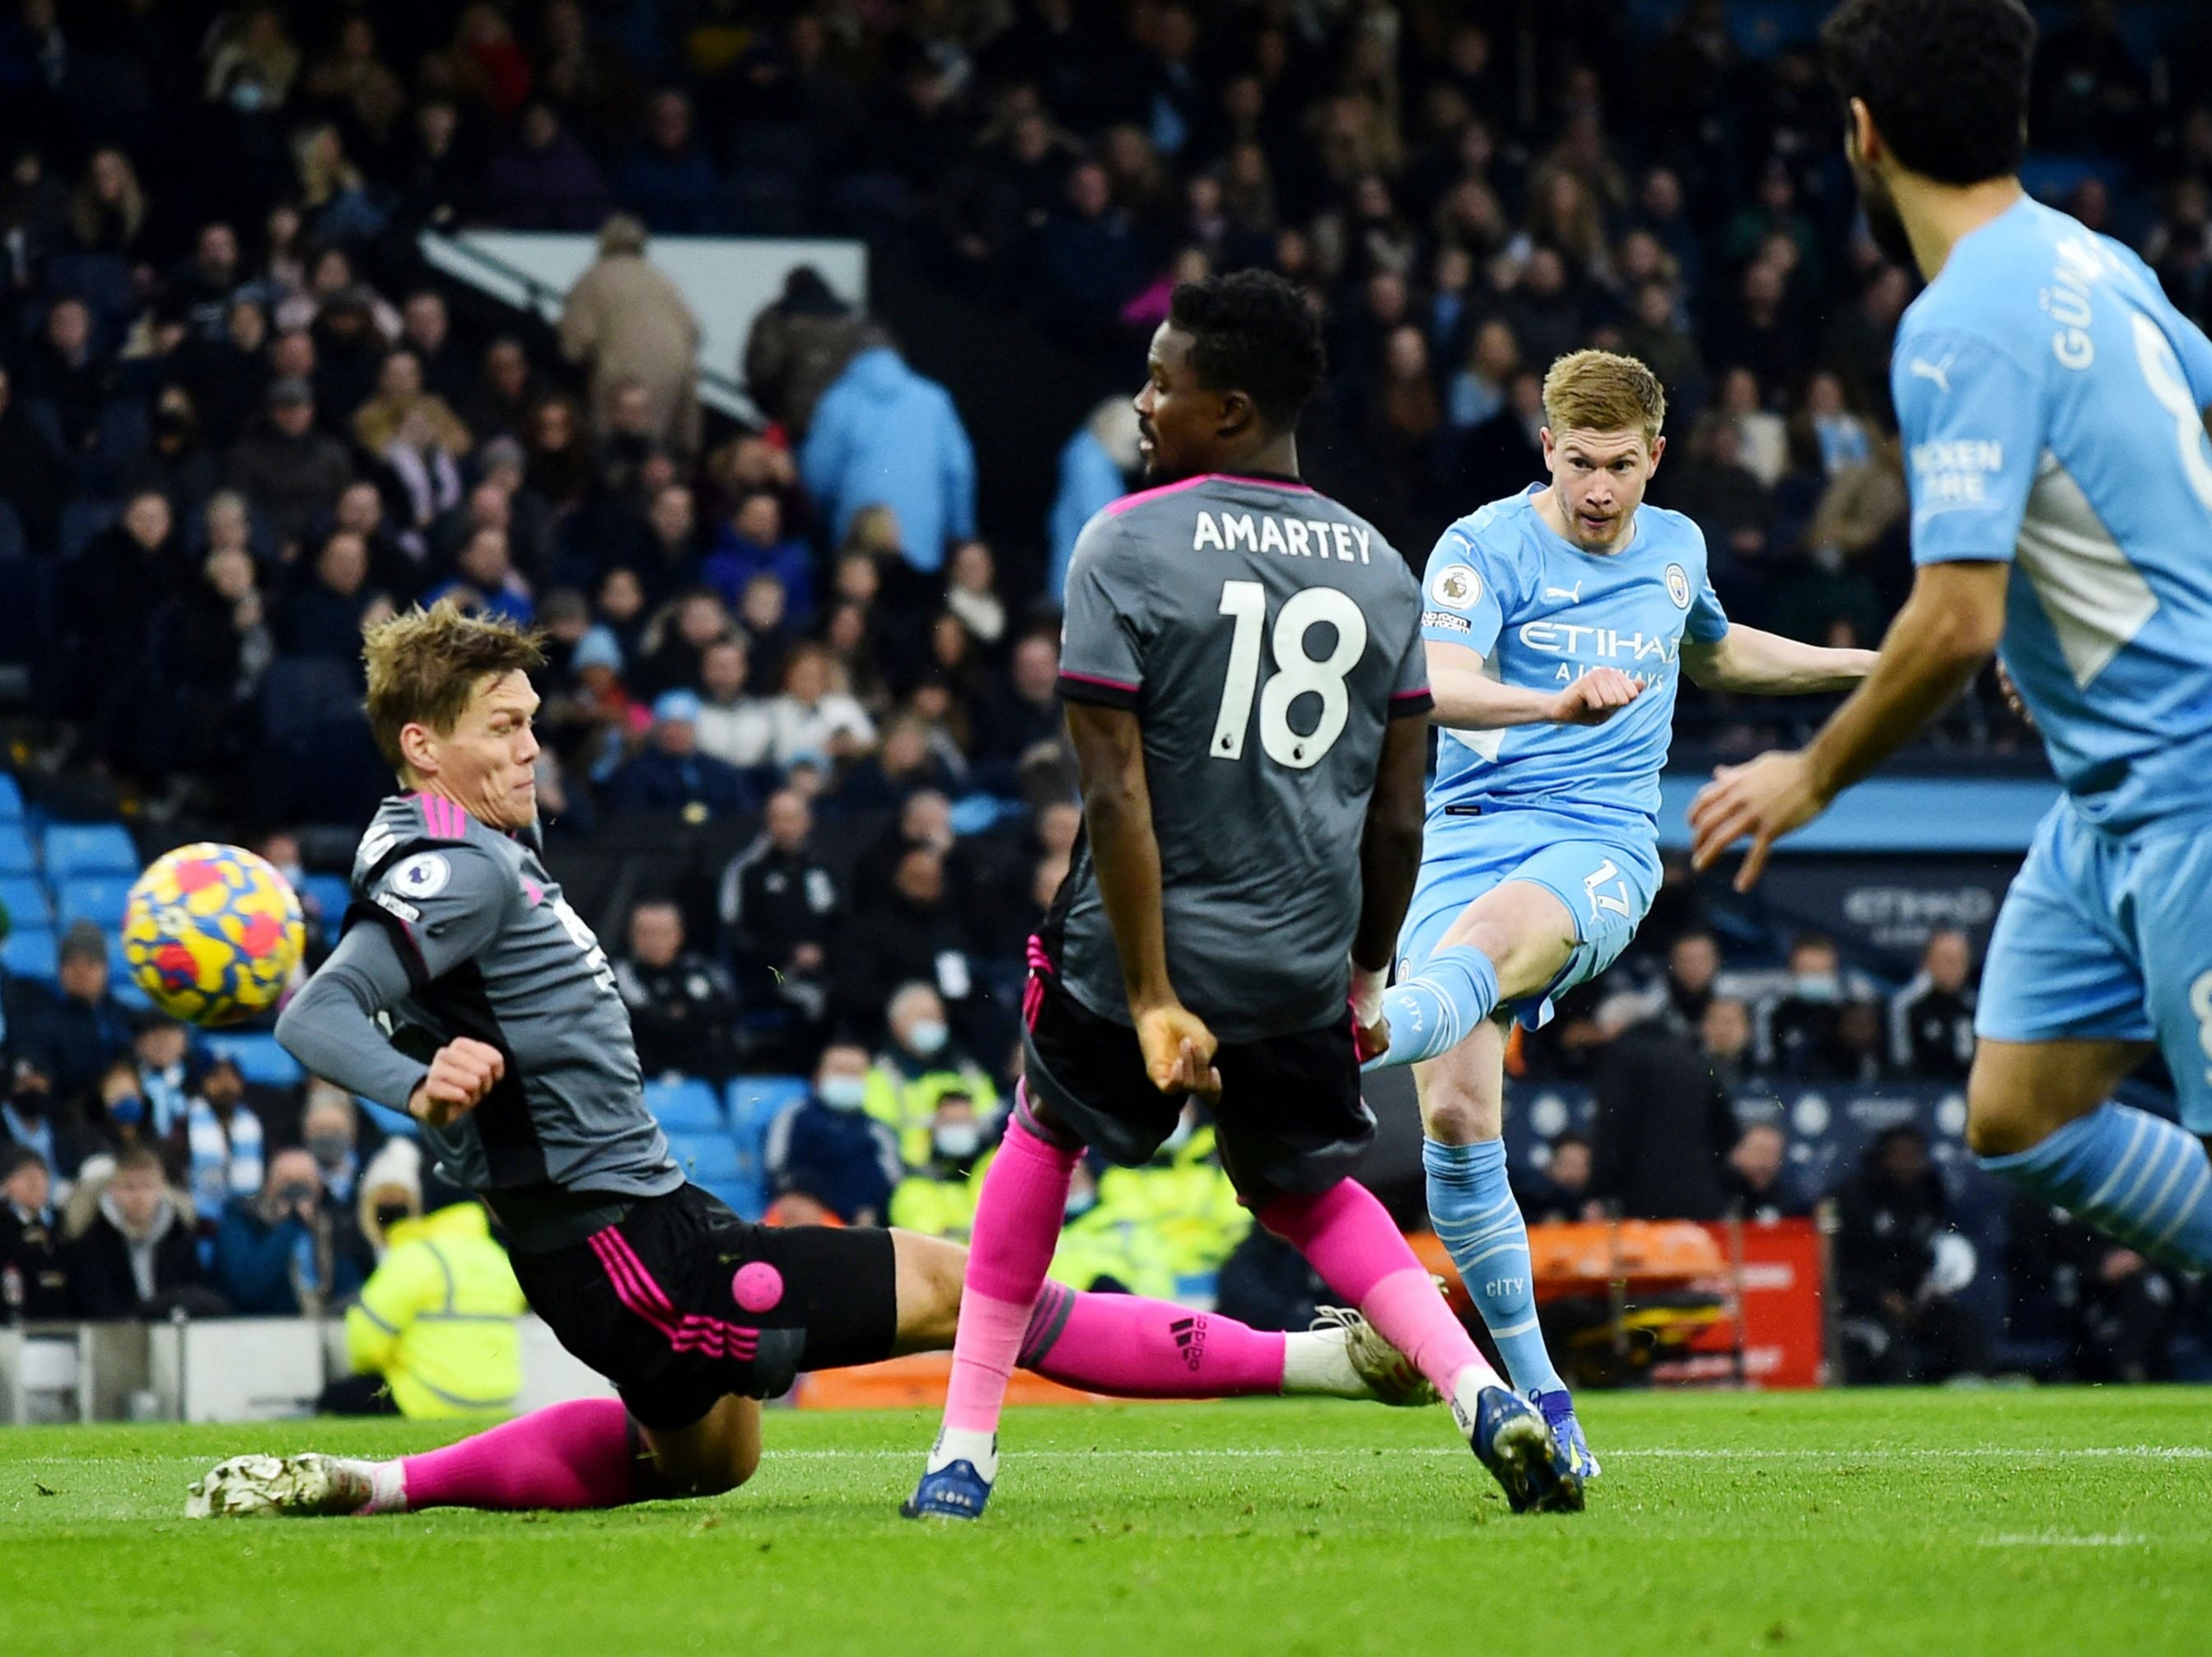 Kevin De Bruyne opened the scoring for Manchester City